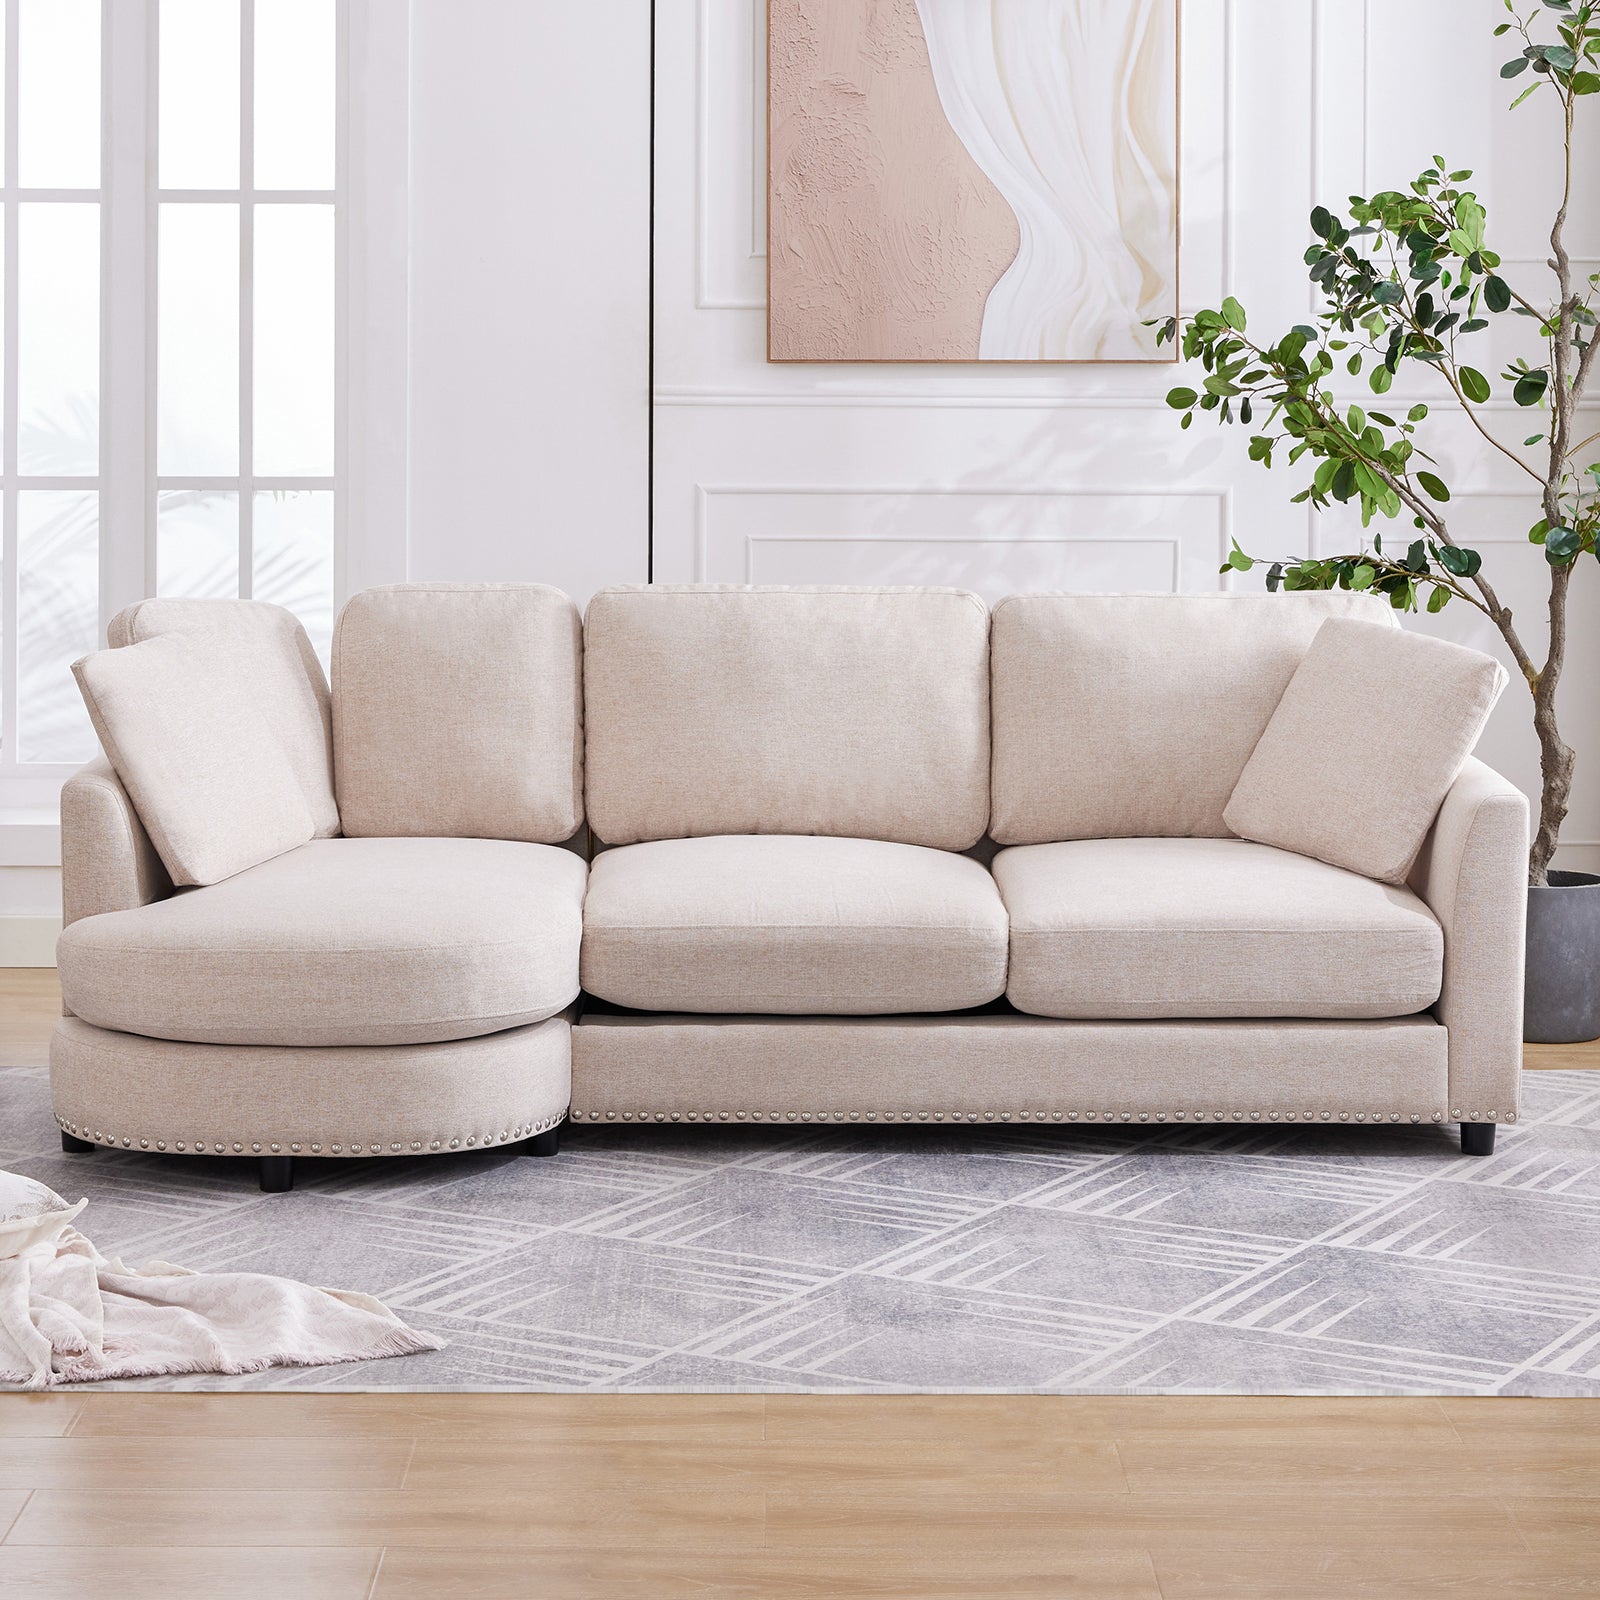 Cecer 3-Seater Modern Curved Sofa Couch